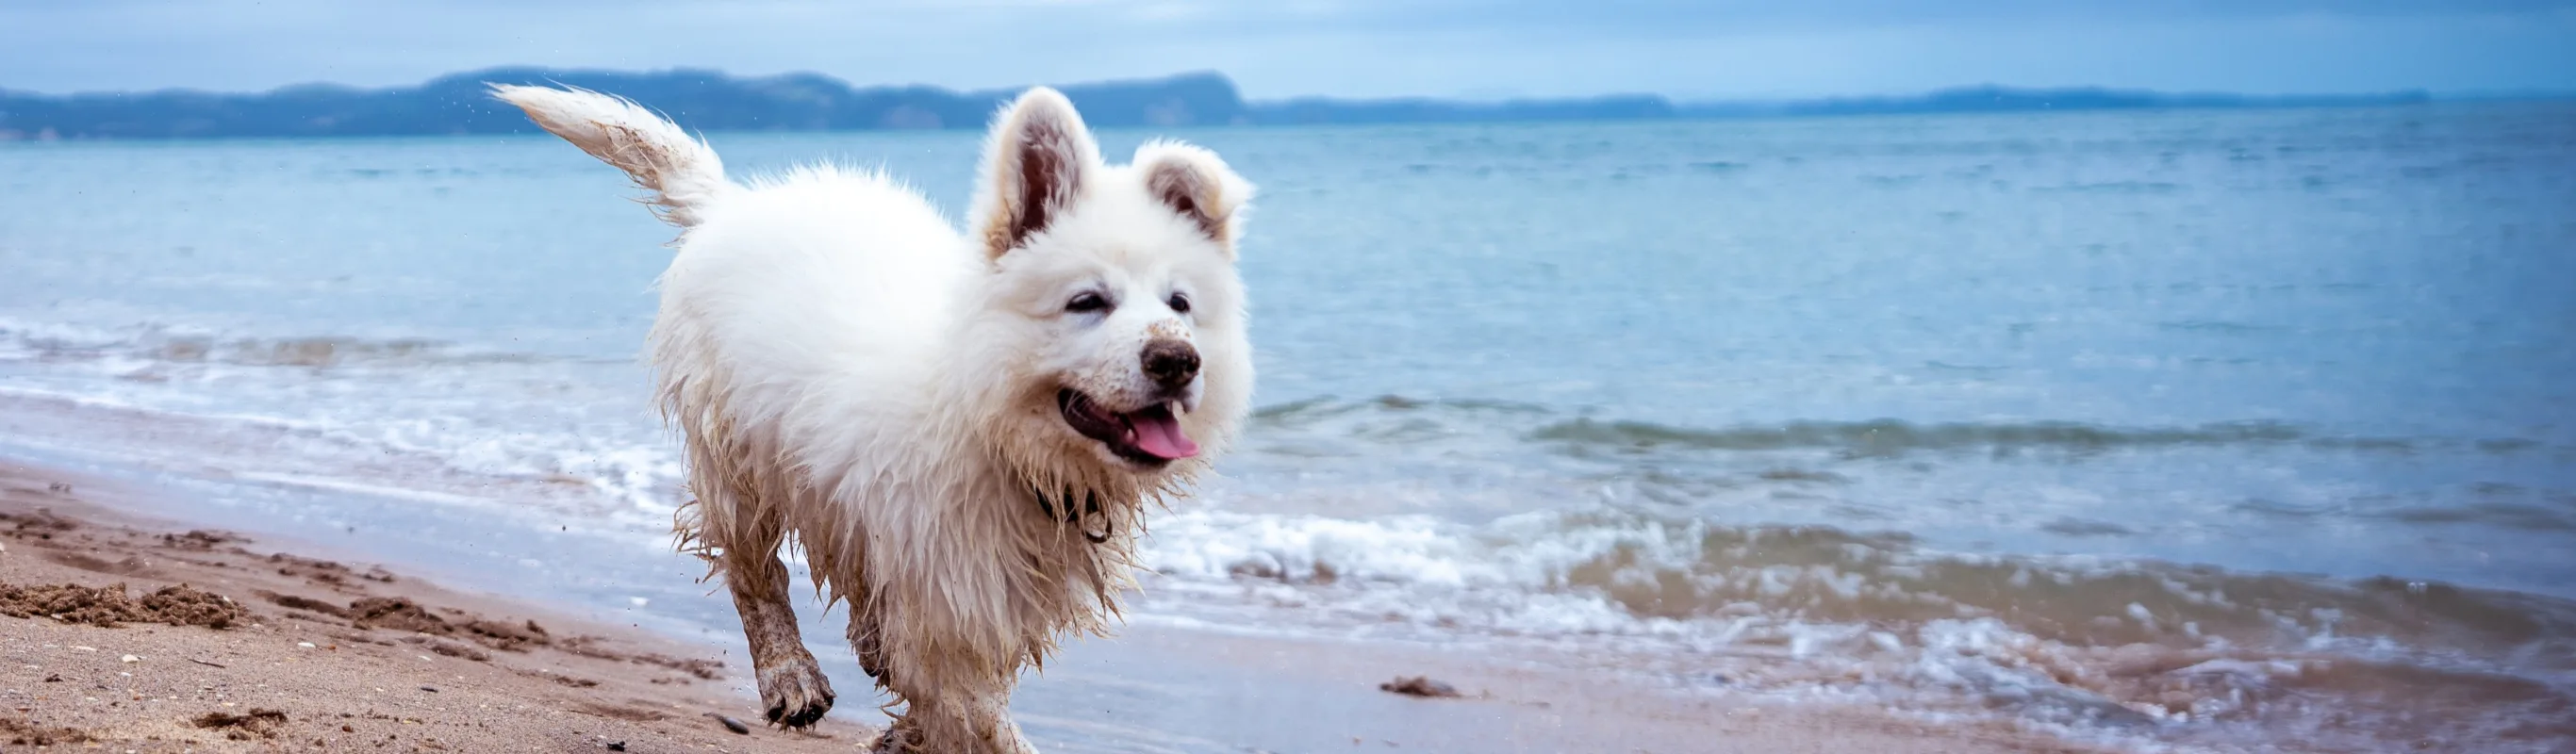 Dog in the waves on the sandy beach